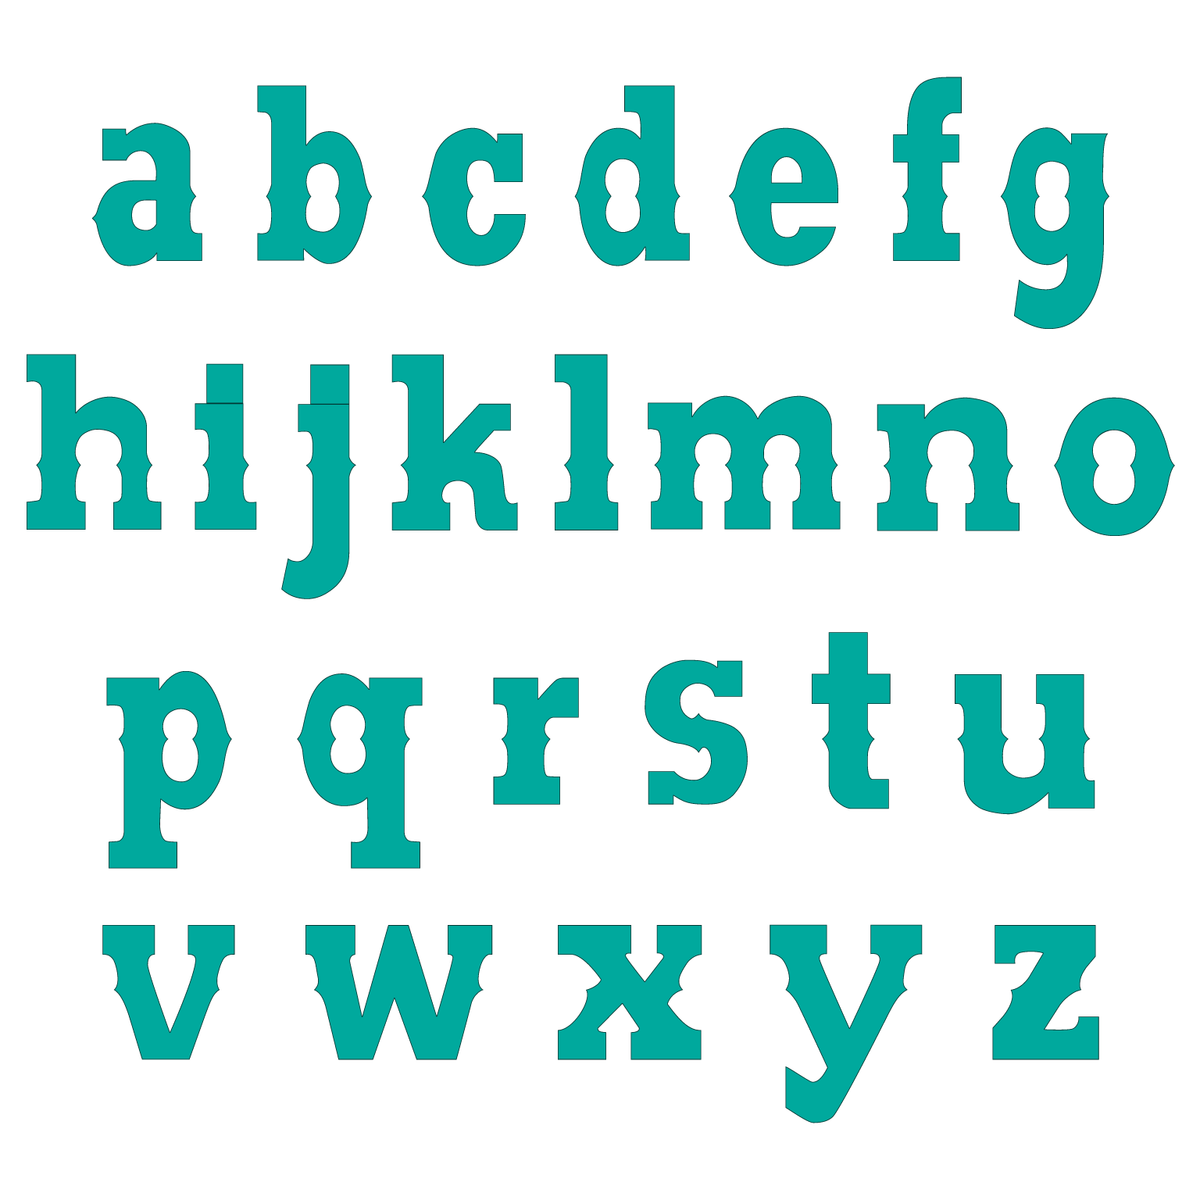 The Western Lowercase Flexabet Silicone Letter Cutter produces perfectly cut letters, as seen in this image, made by Marvelous Molds